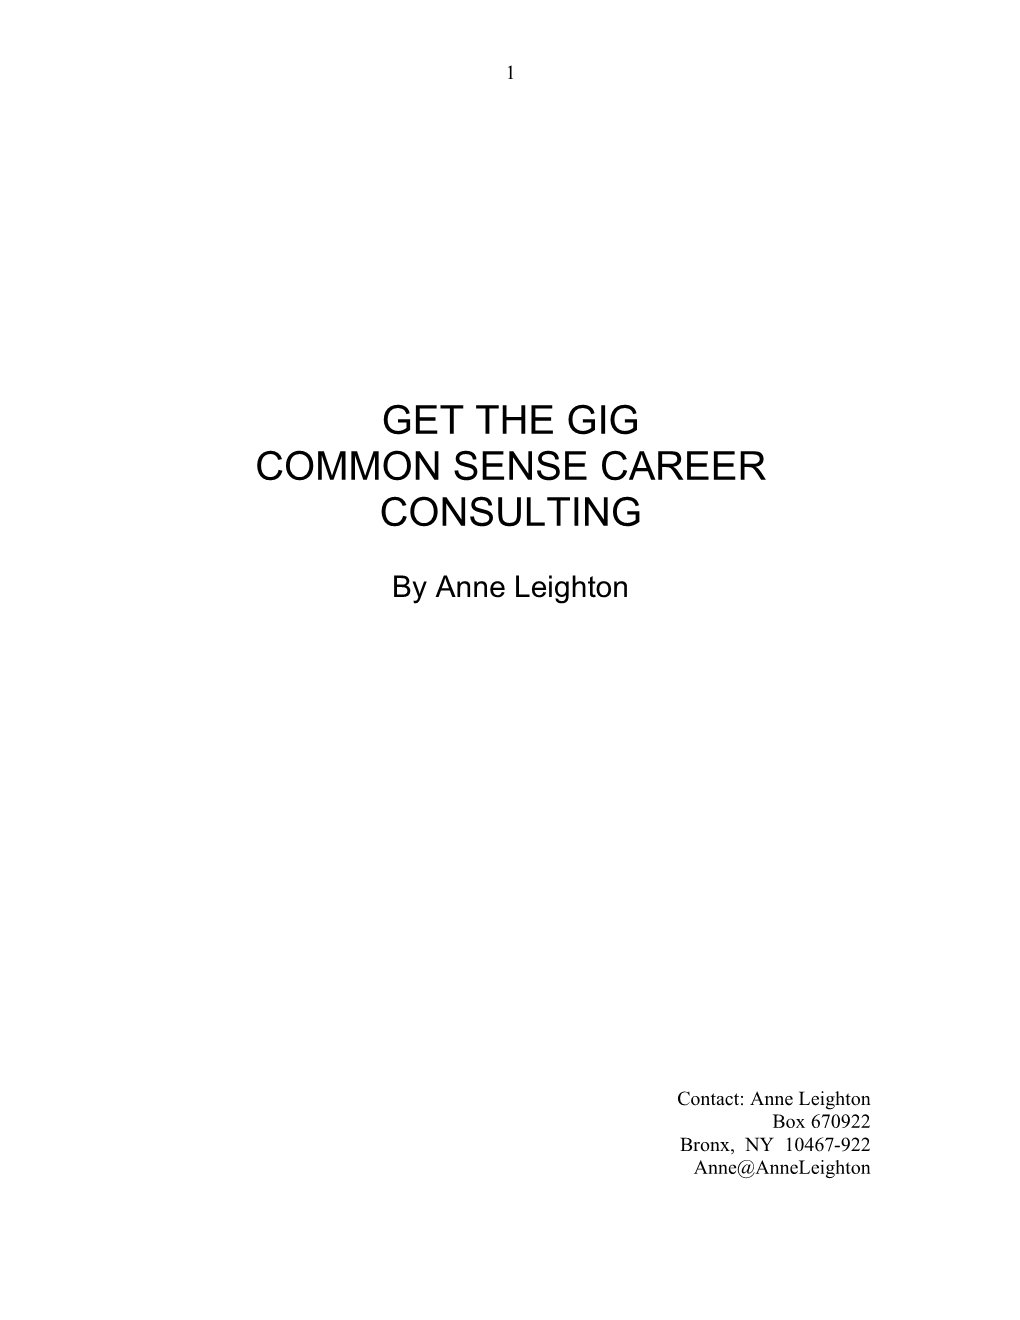 GET the GIG Book